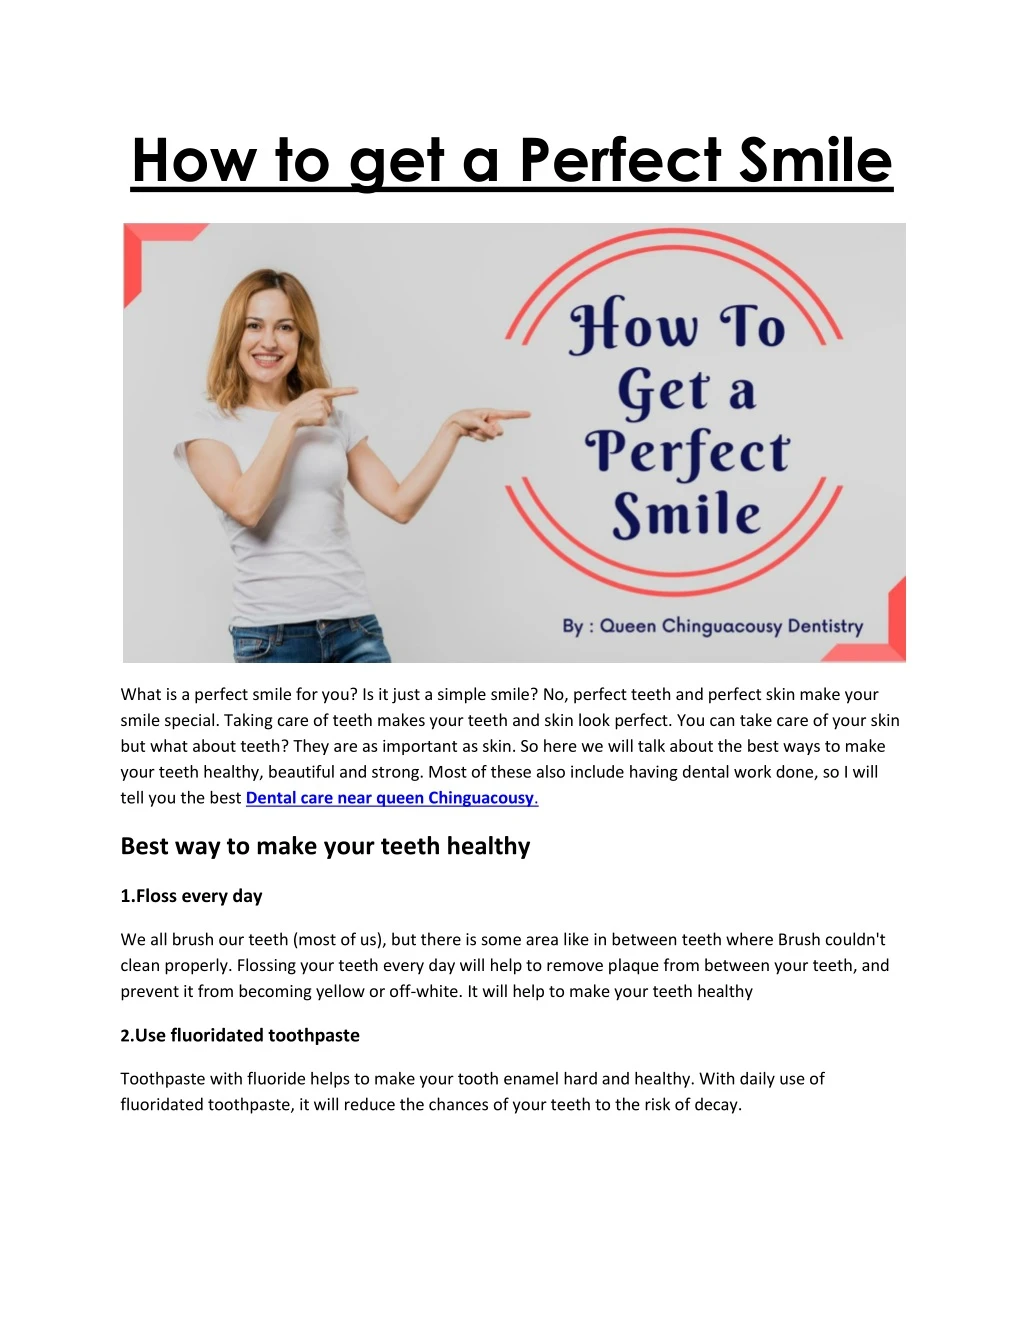 how to get a perfect smile